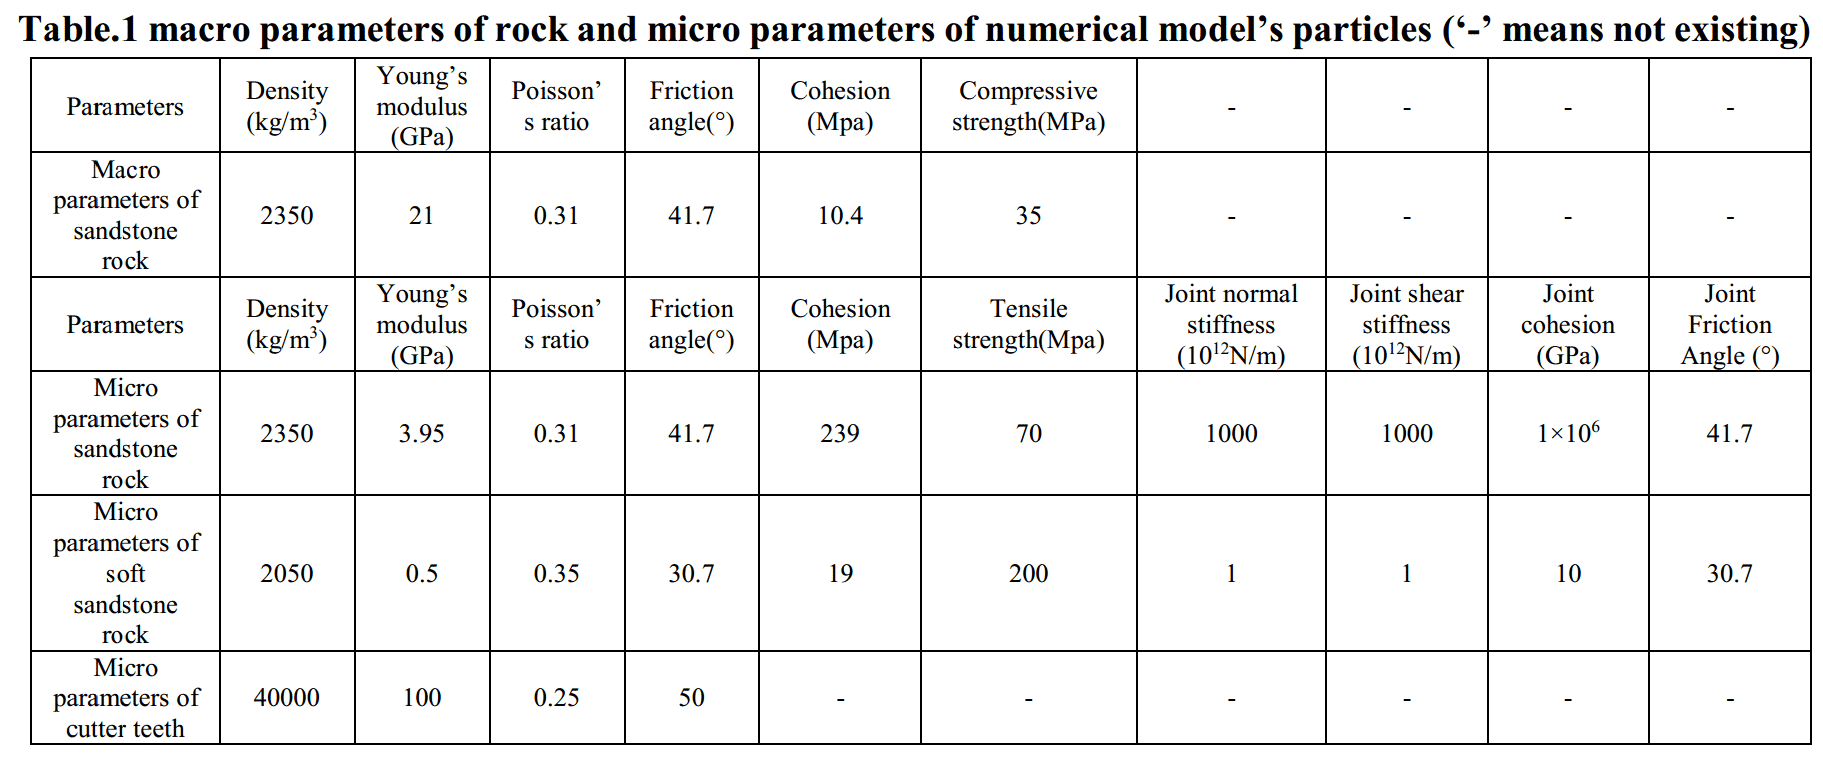 Table.1 macro parameters of rock and micro parameters of numerical model’s particles (‘-’ means not existing)